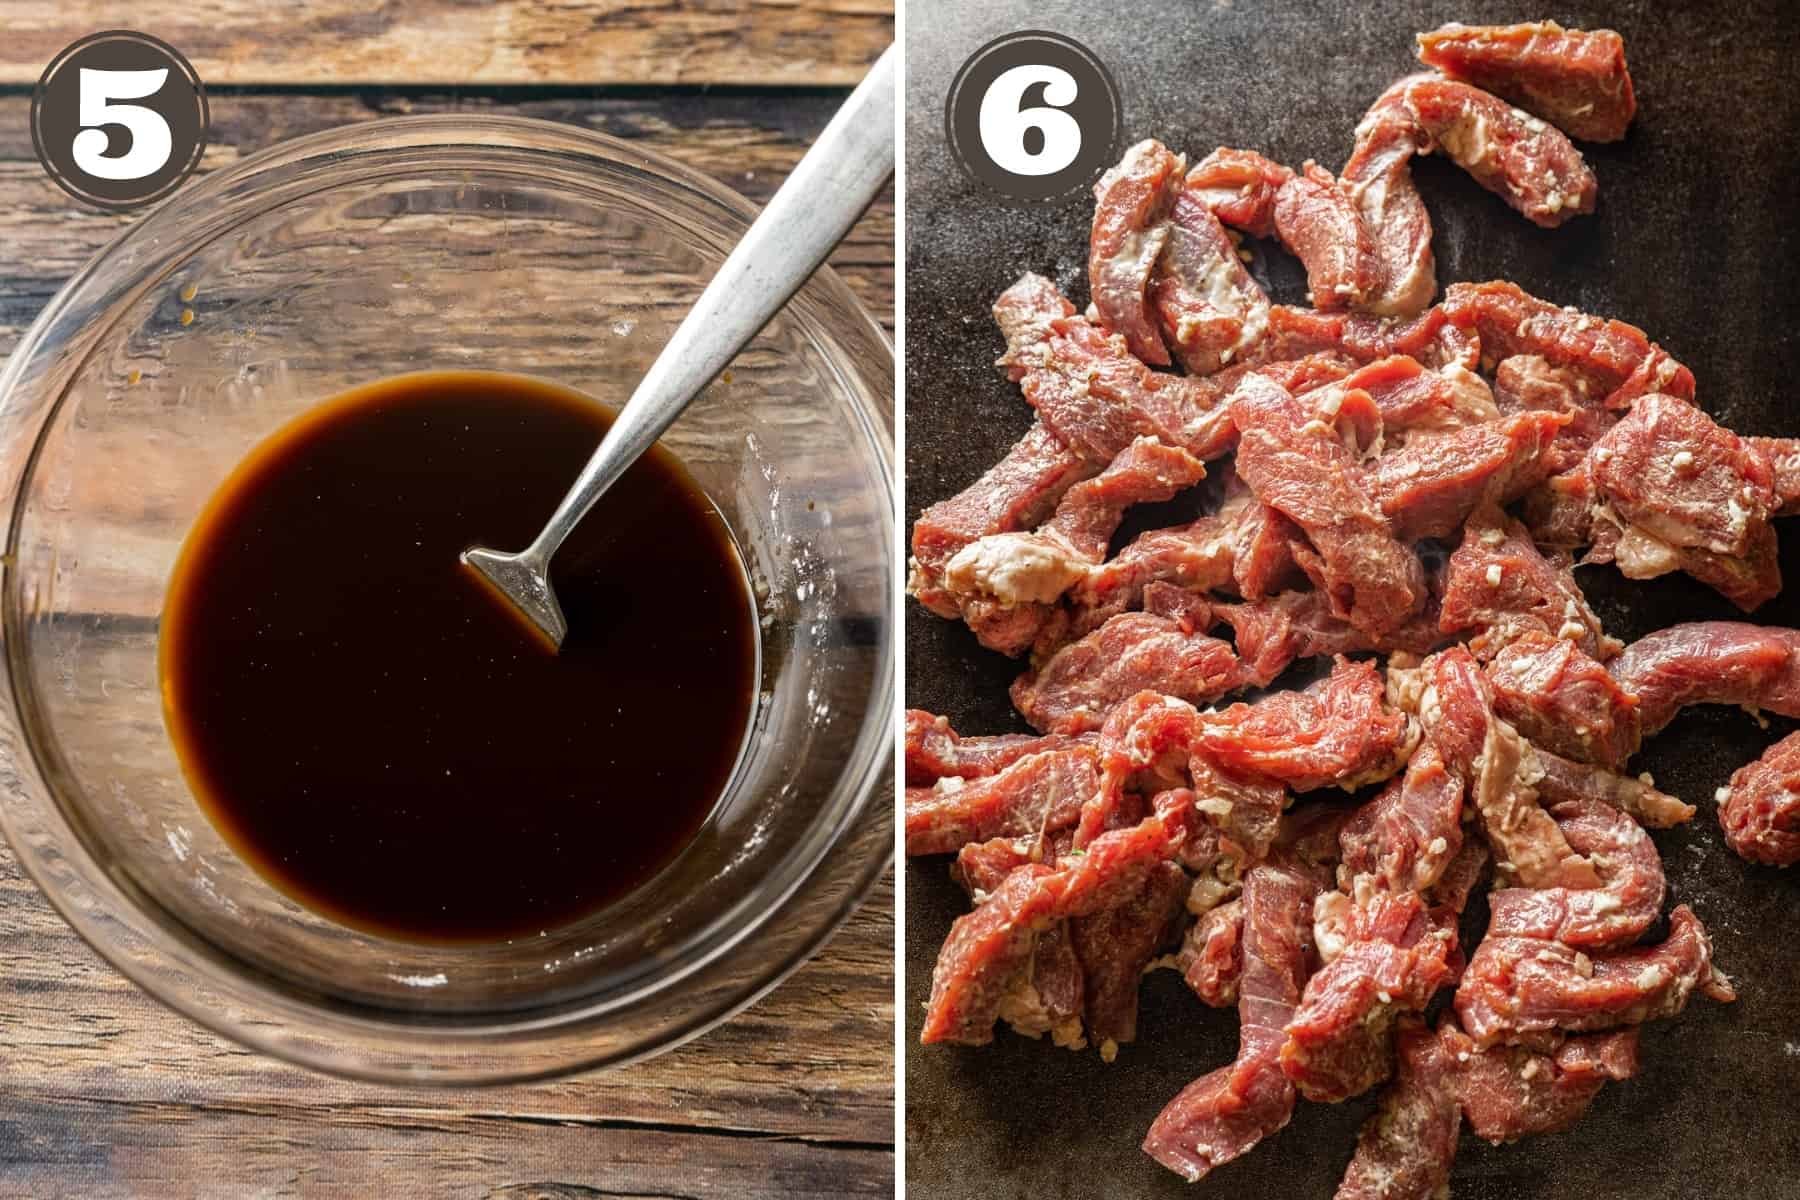 Side by side photos showing a glass bowl with stir fry sauce and steak cooking on a blackstone griddle.